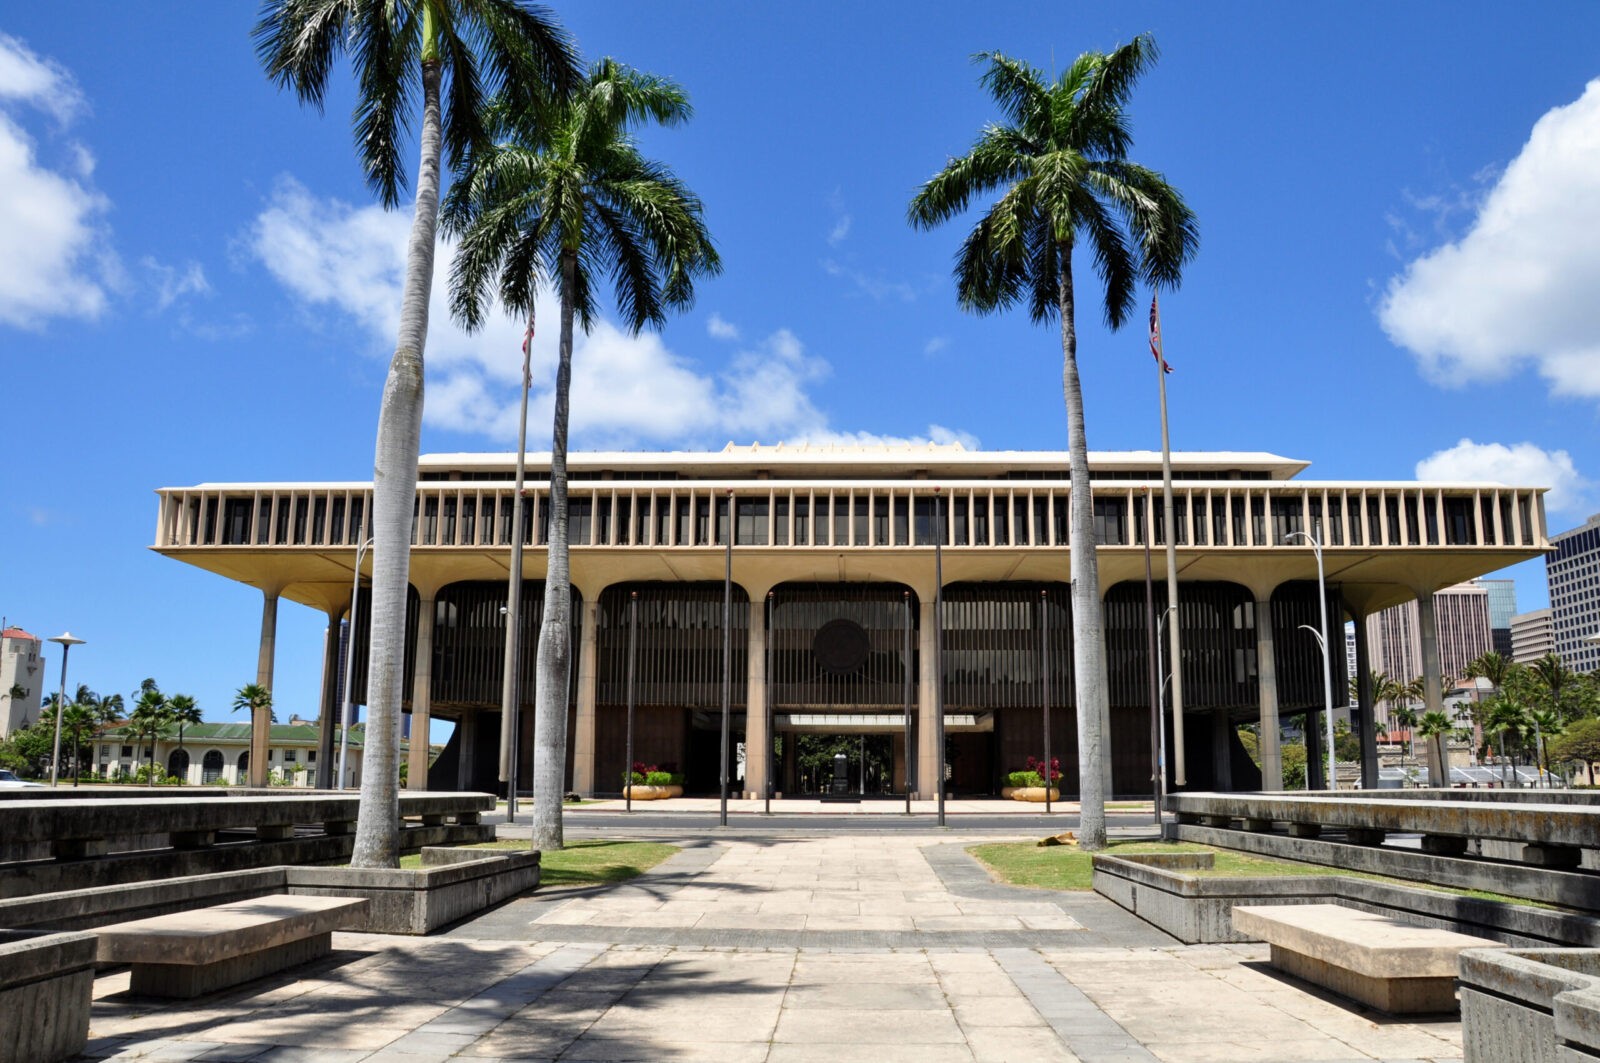 Hawaii State Capitol Building